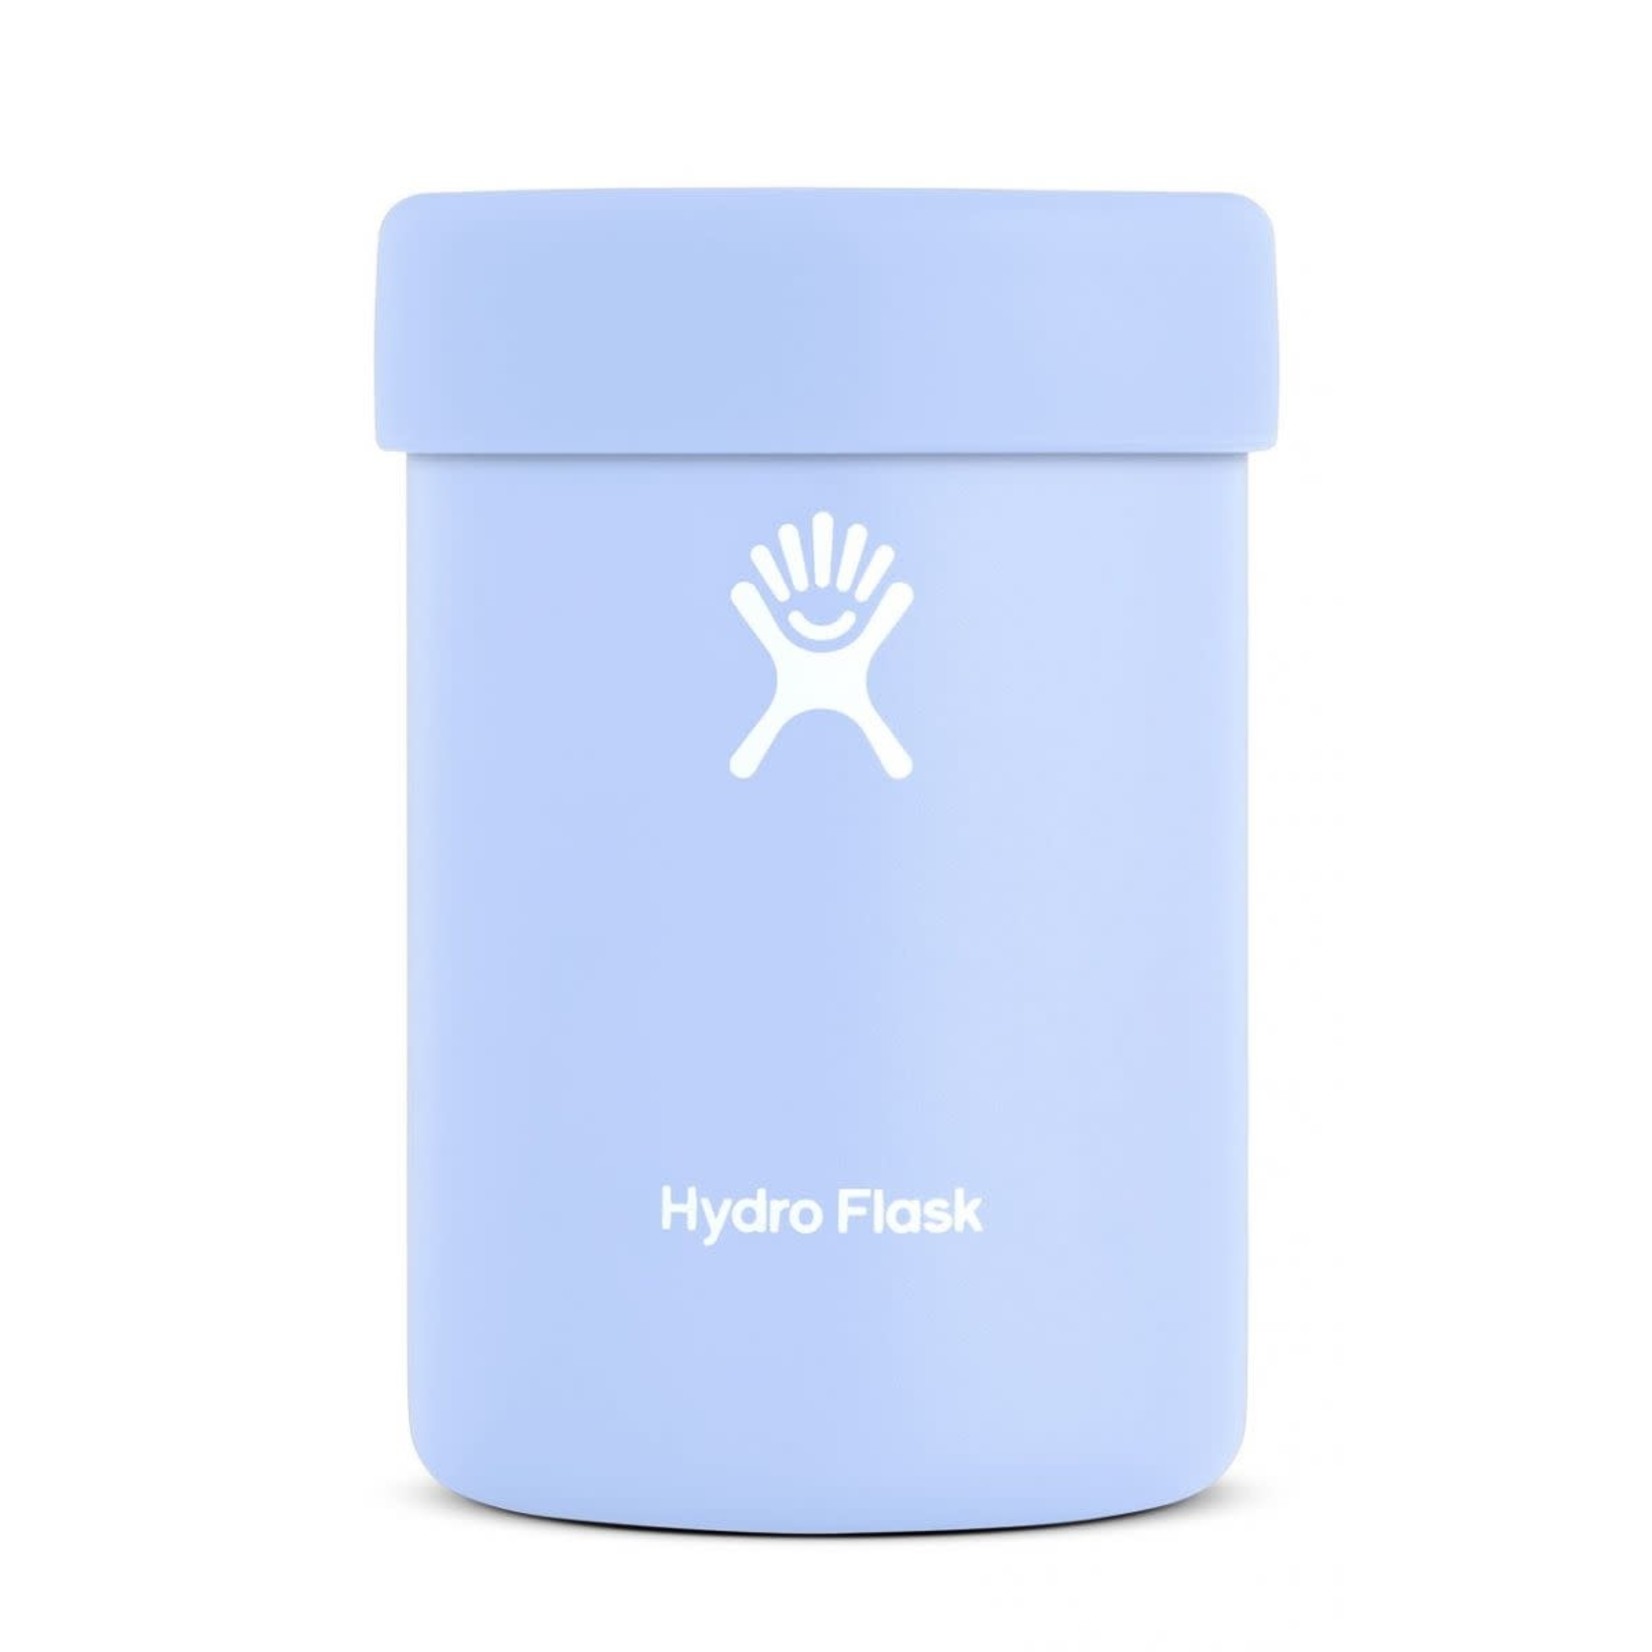 Hydro Flask Hydro Flask 12oz Cooler Cup.